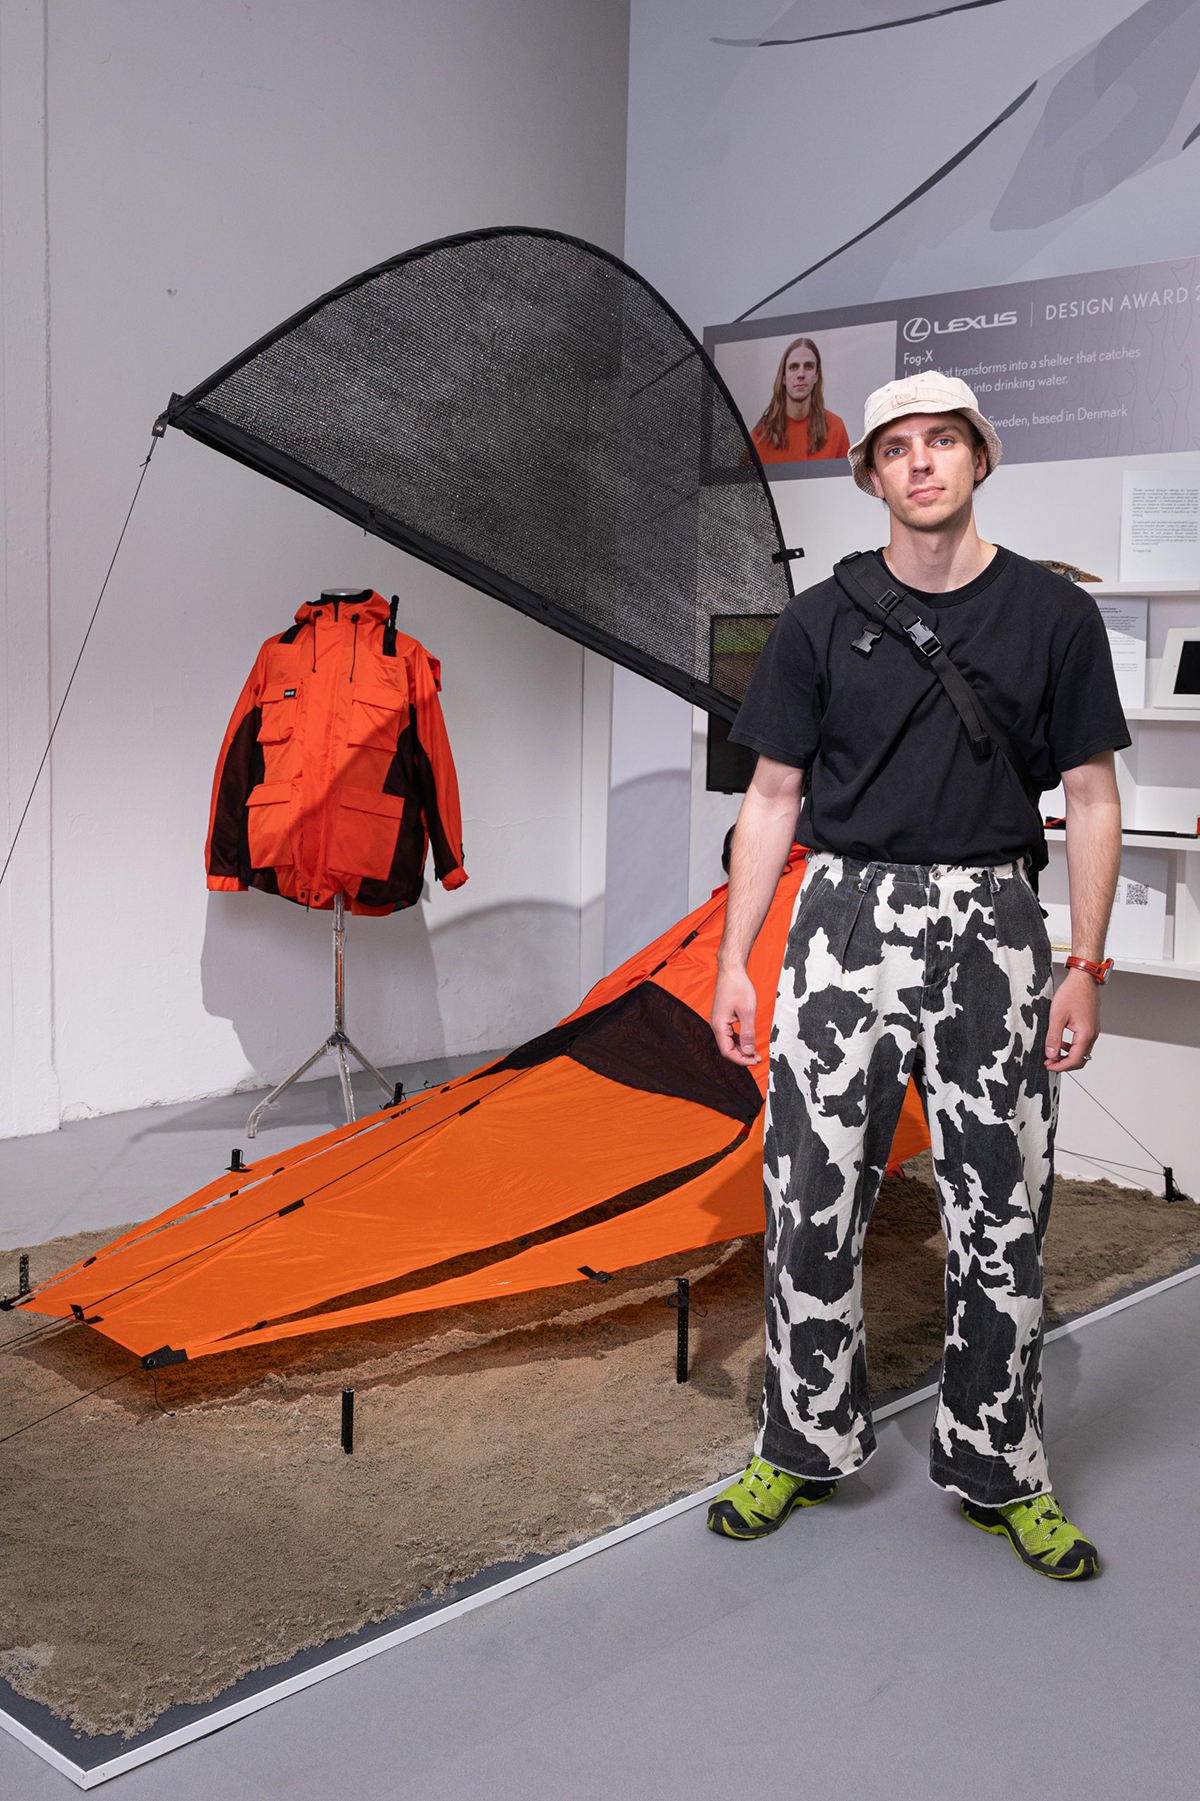 A man wearing cow print trousers and a black top standing next to an orange bag